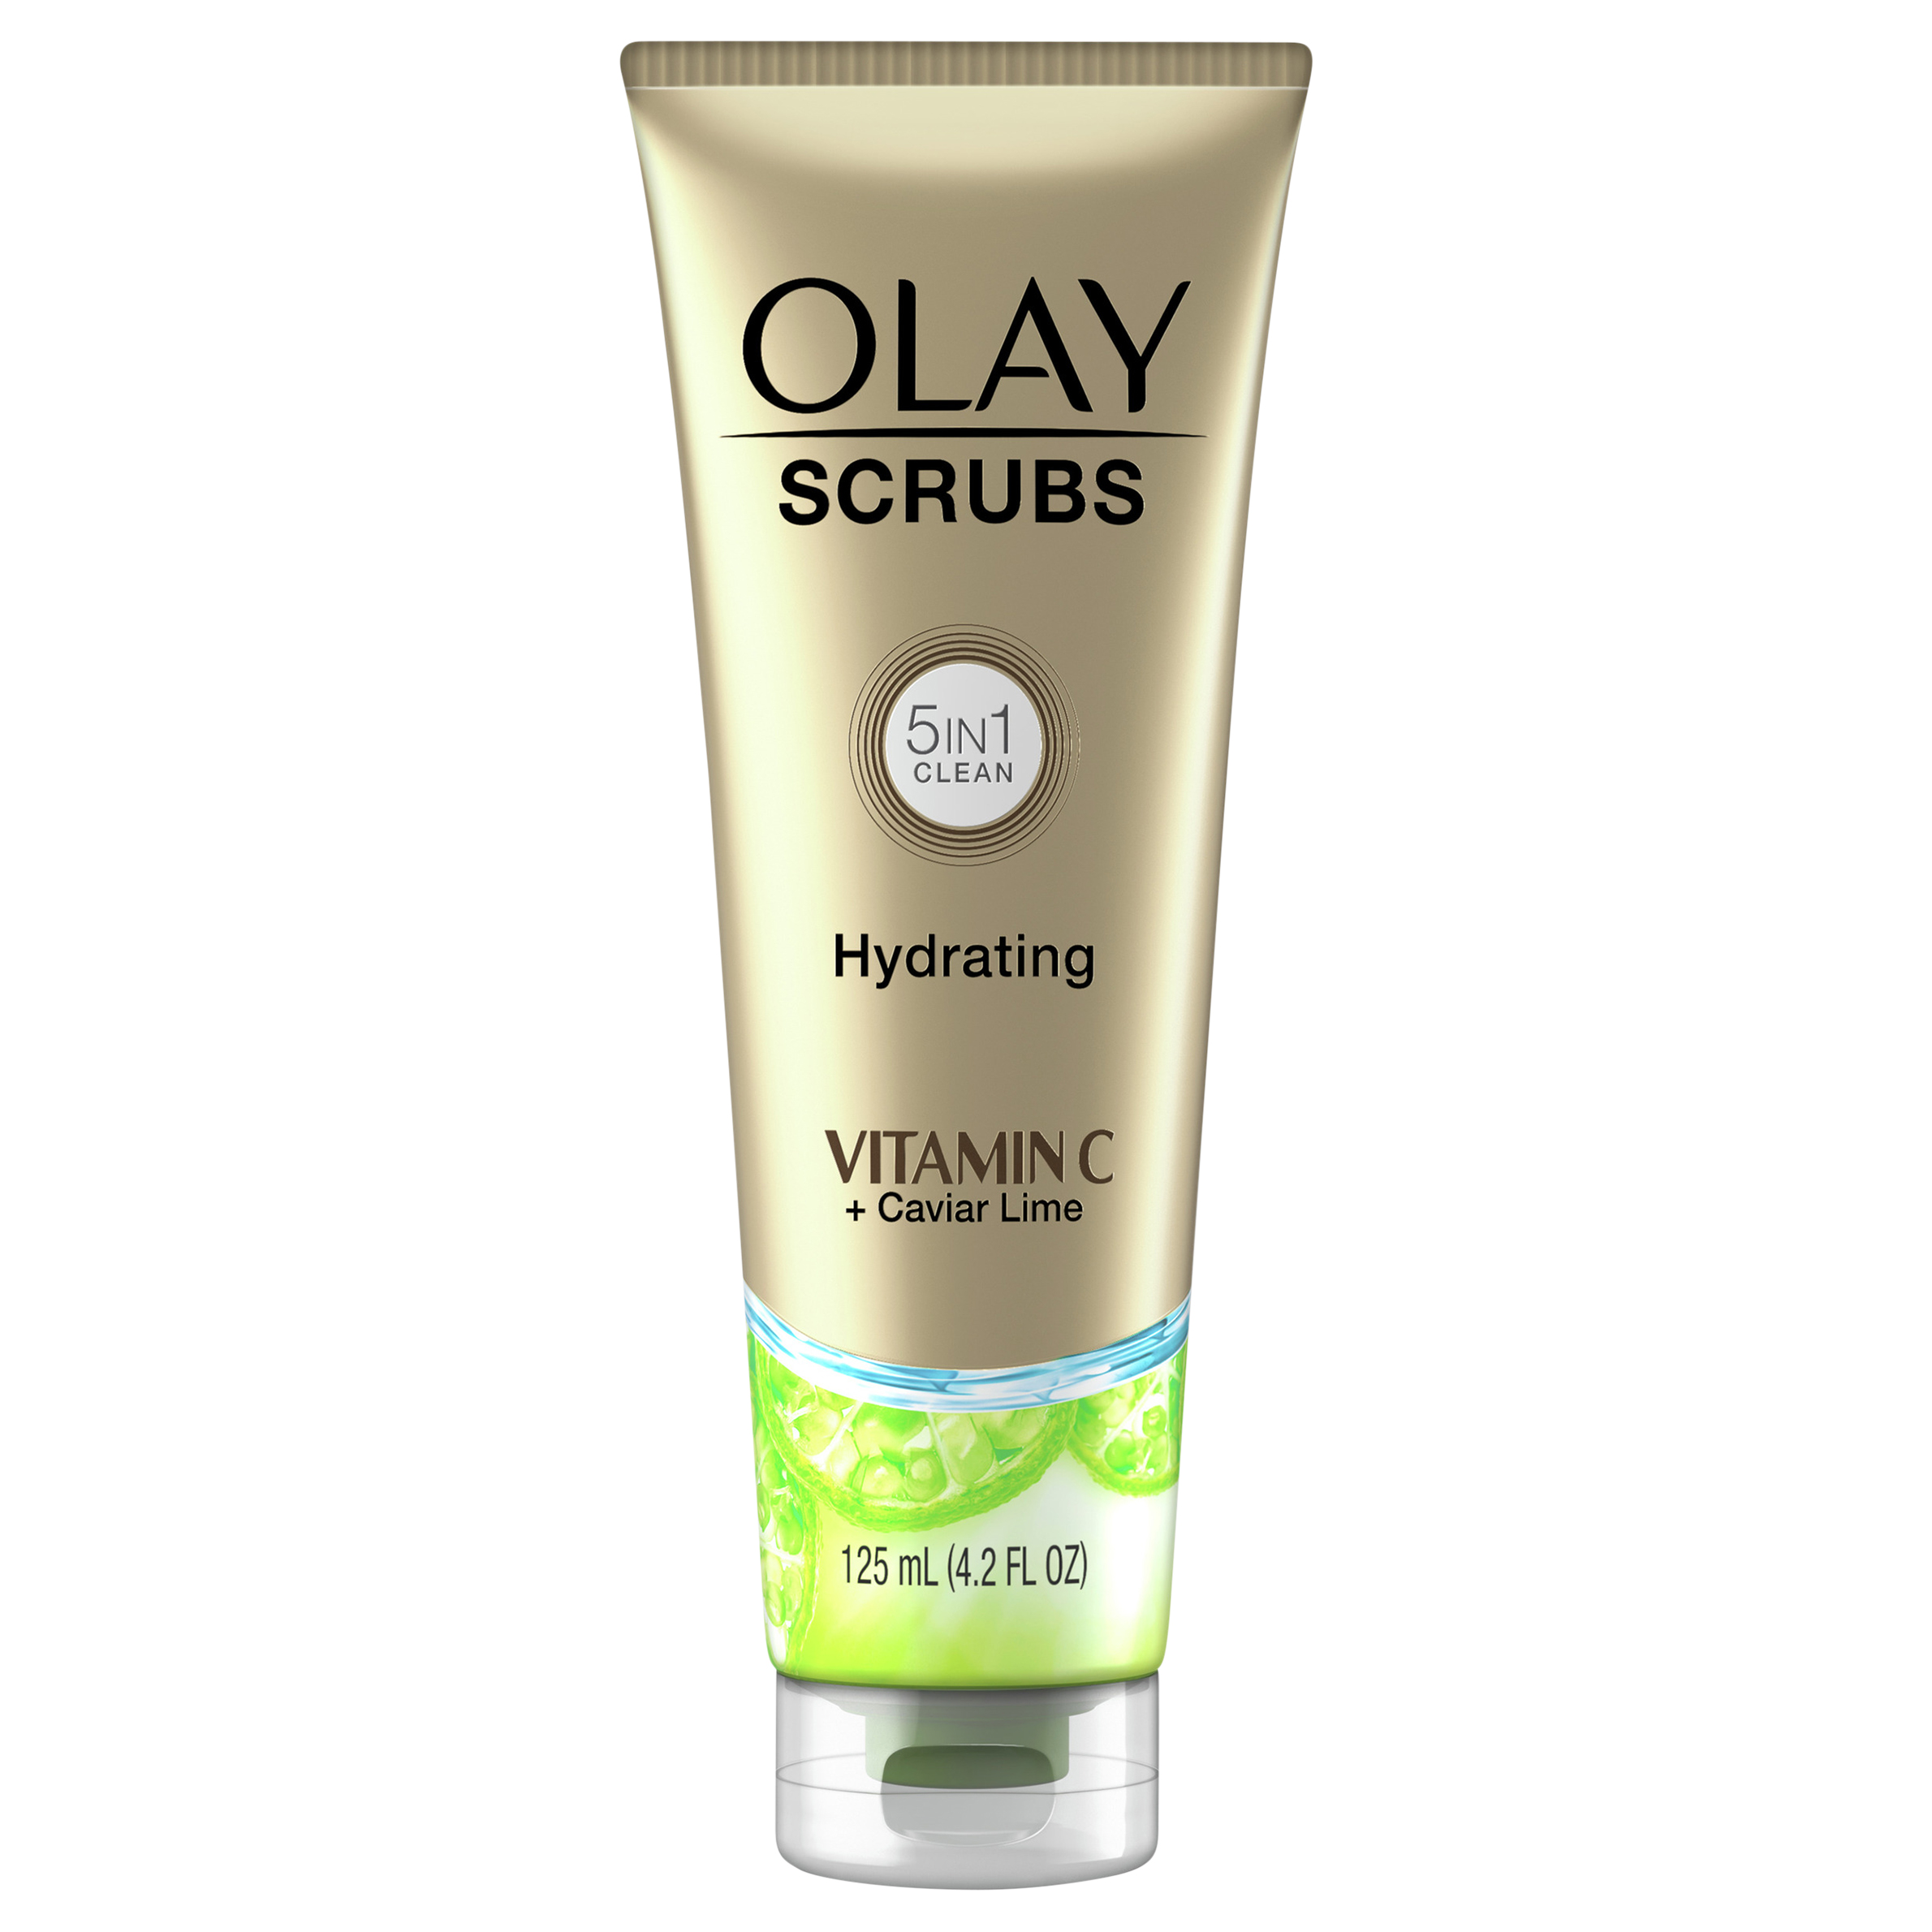 Olay Scrubs 5-in-1 Clean Hydrating Vitamin C and Caviar Lime 4.2 fl oz - image 3 of 3